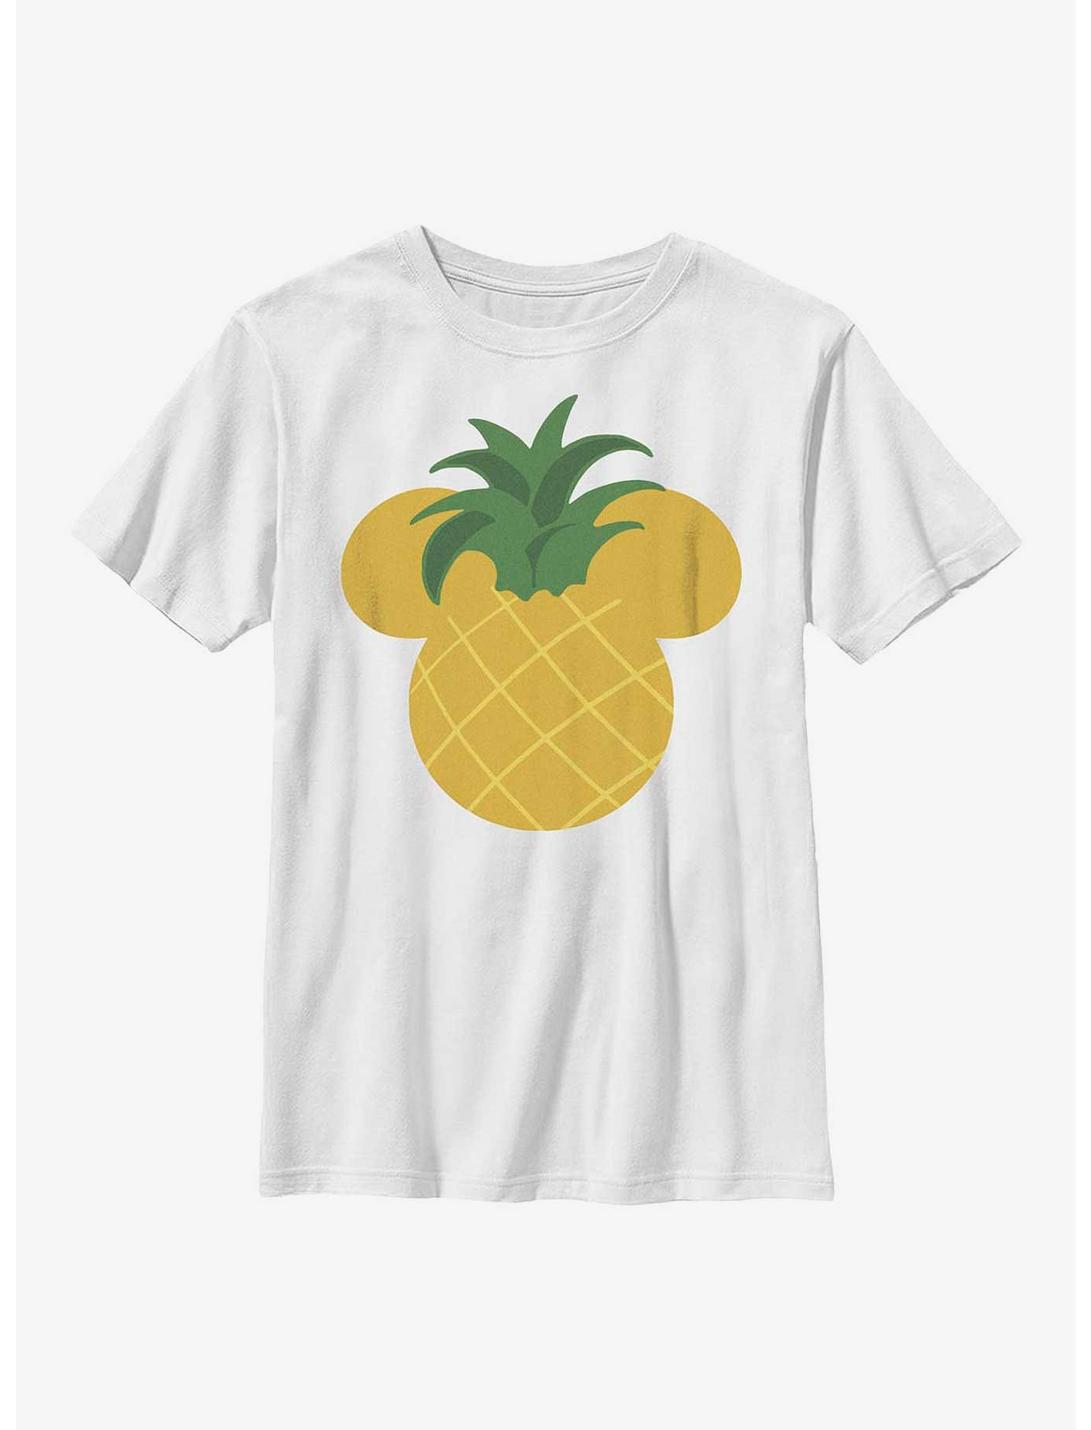 Disney Mickey Mouse Pineapple Ears Youth T-Shirt, WHITE, hi-res